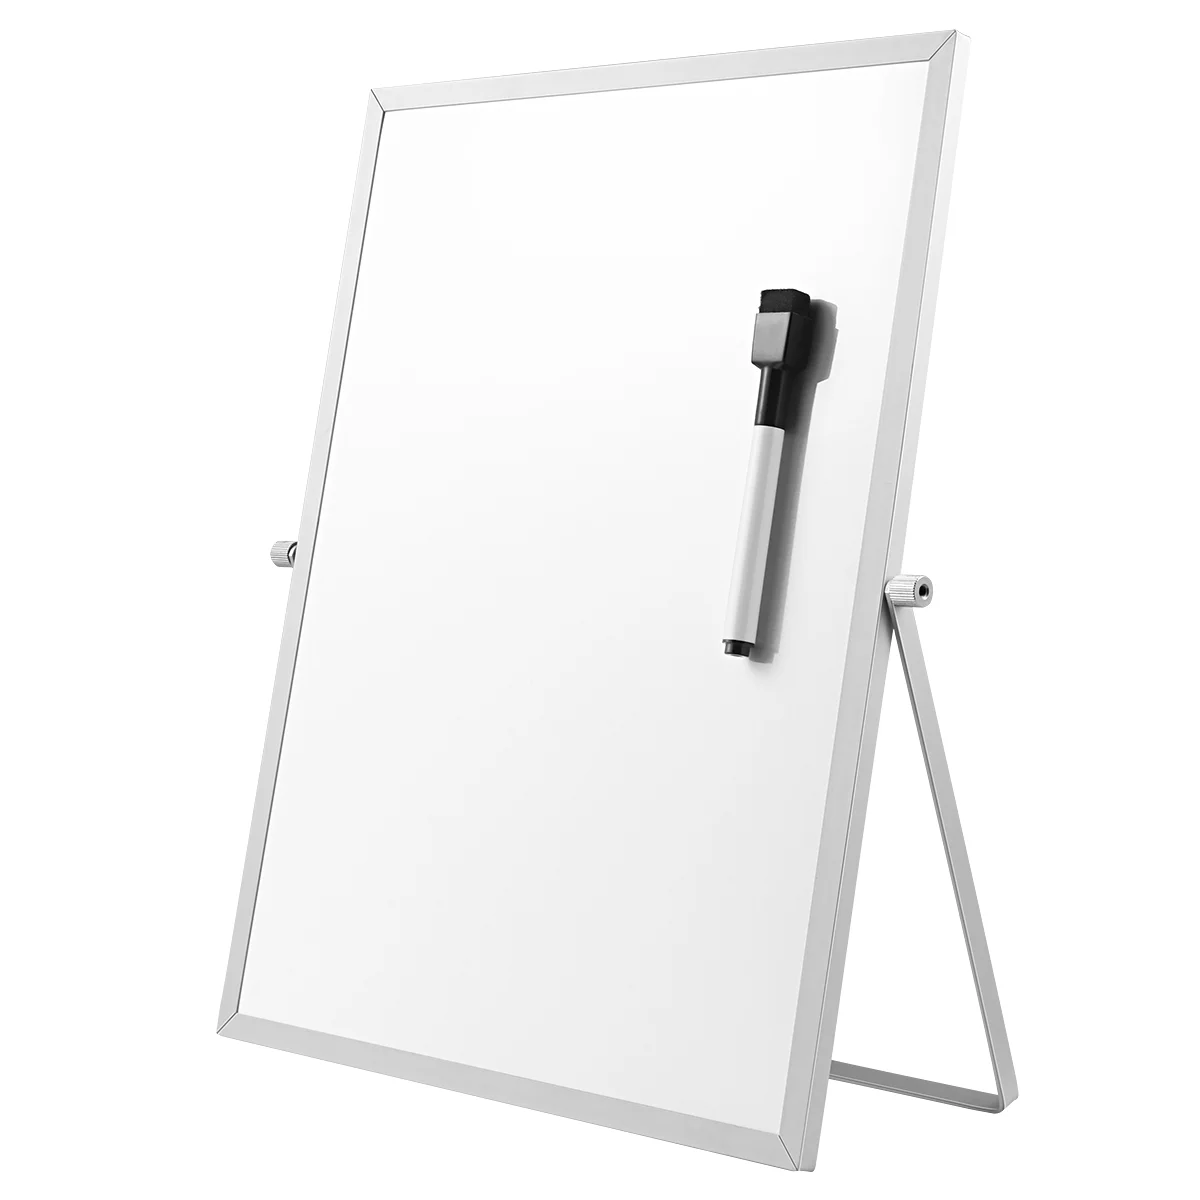 magnetic whiteboard soft home office kitchen school dry erase board white board flexible pad magnet fridge a4 a5 set package Magnetic White Board Dry Erase Board Double Sided Practical with Stand White Board for Office School Home Whiteboard Erasable